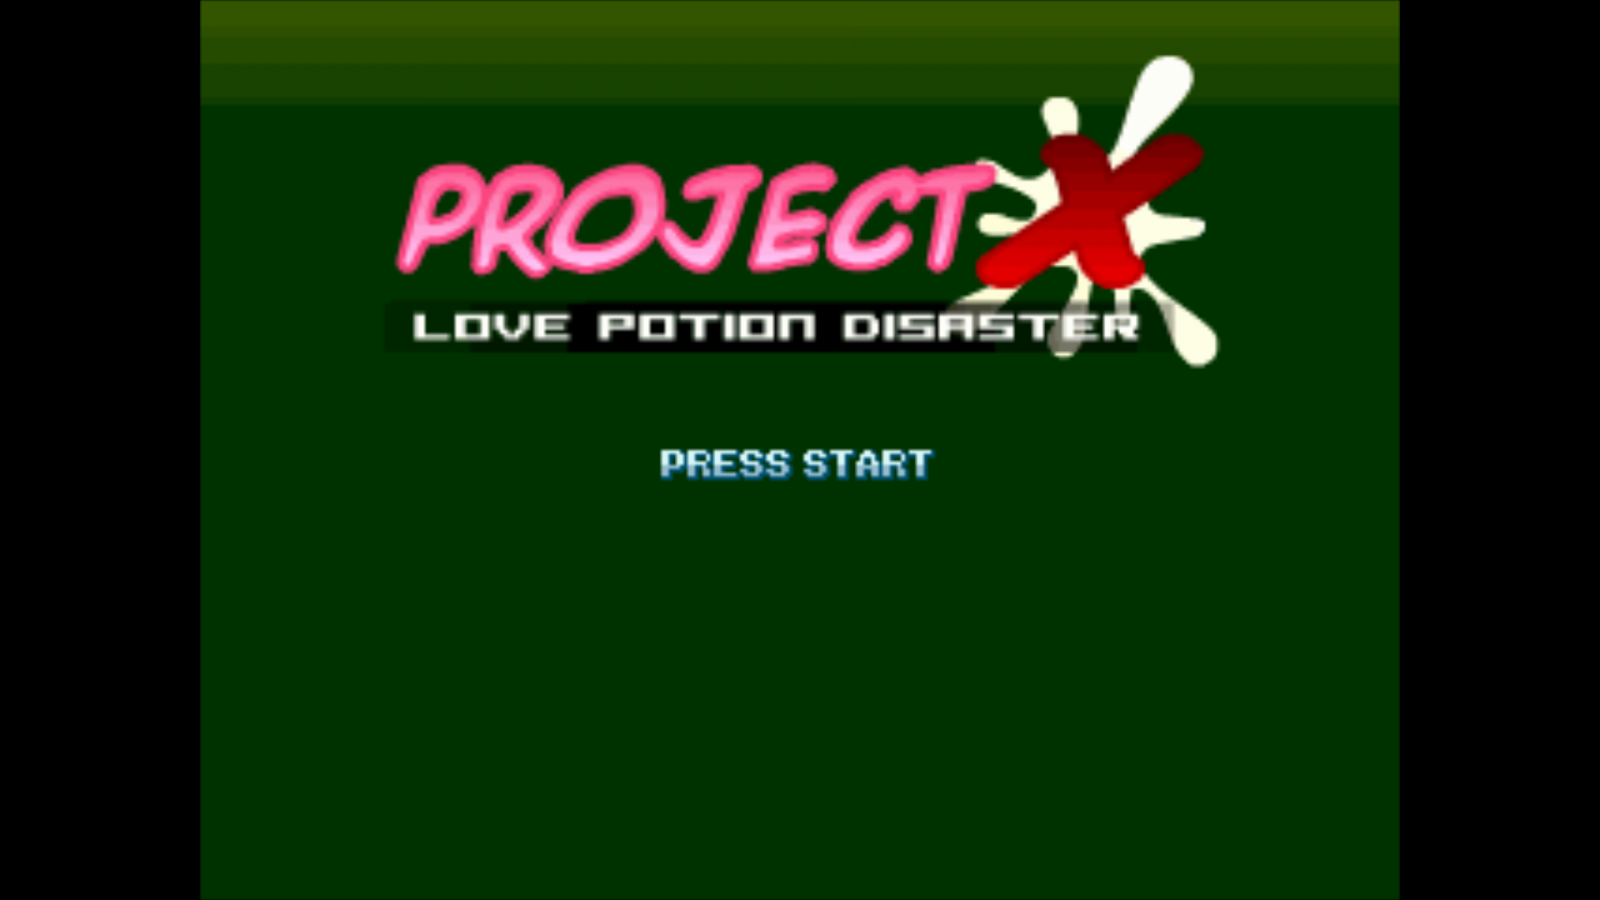 project x love potion disaster 3.5 download